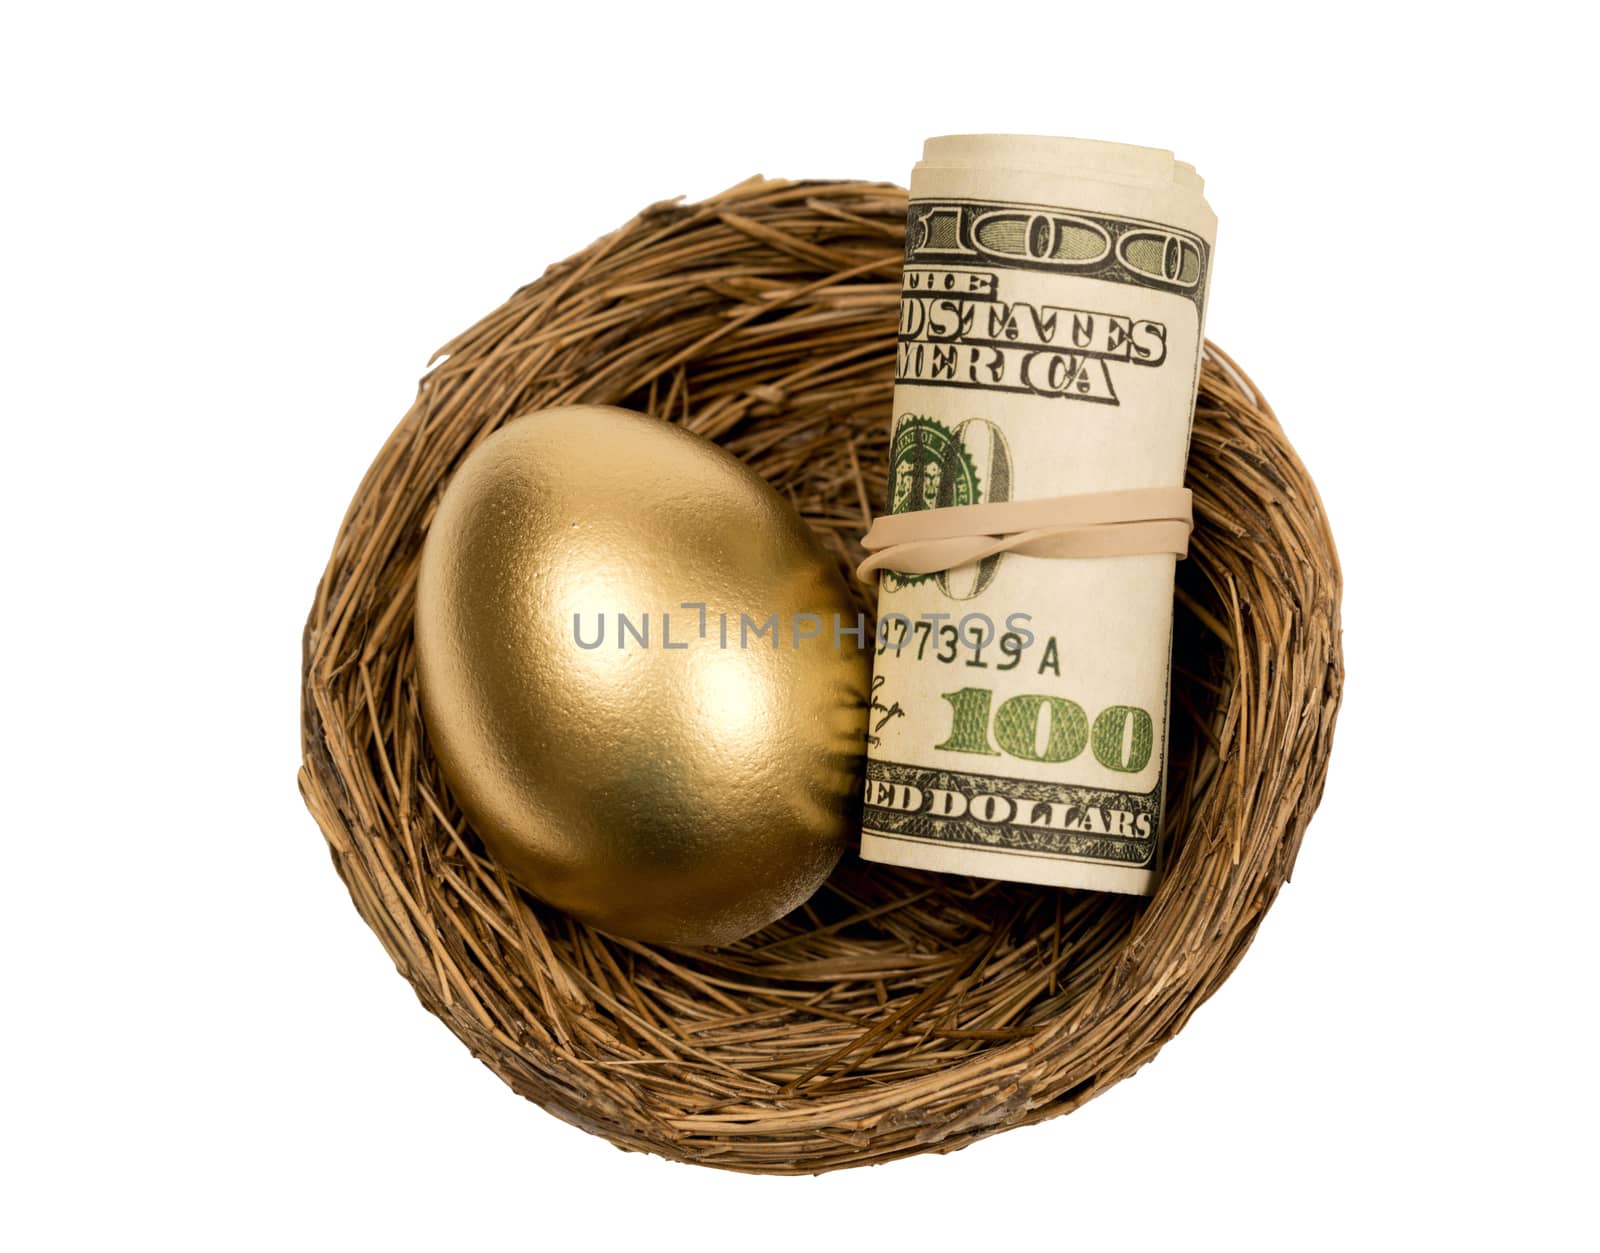 Golden Egg With Roll Of Money In Nest by stockbuster1